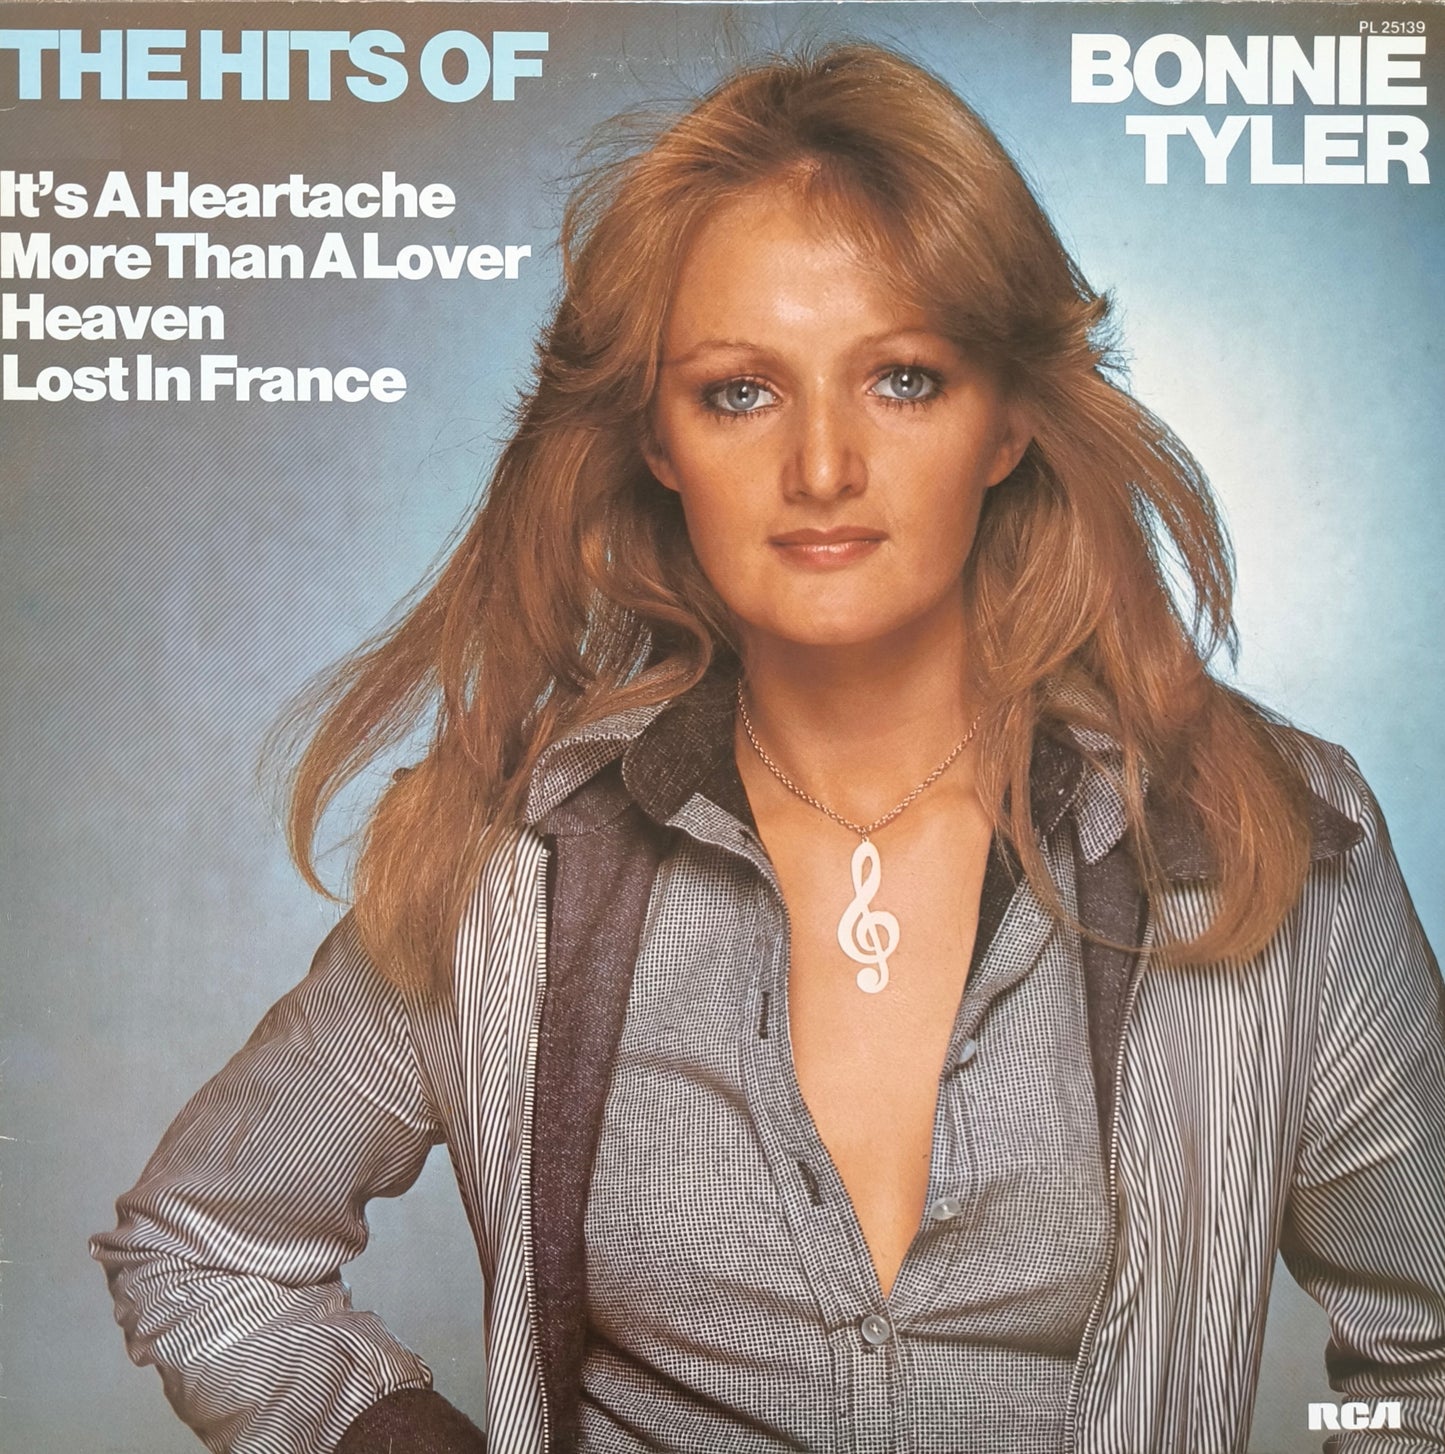 BONNIE TYLER - The Hits Of Bonnie Tyler